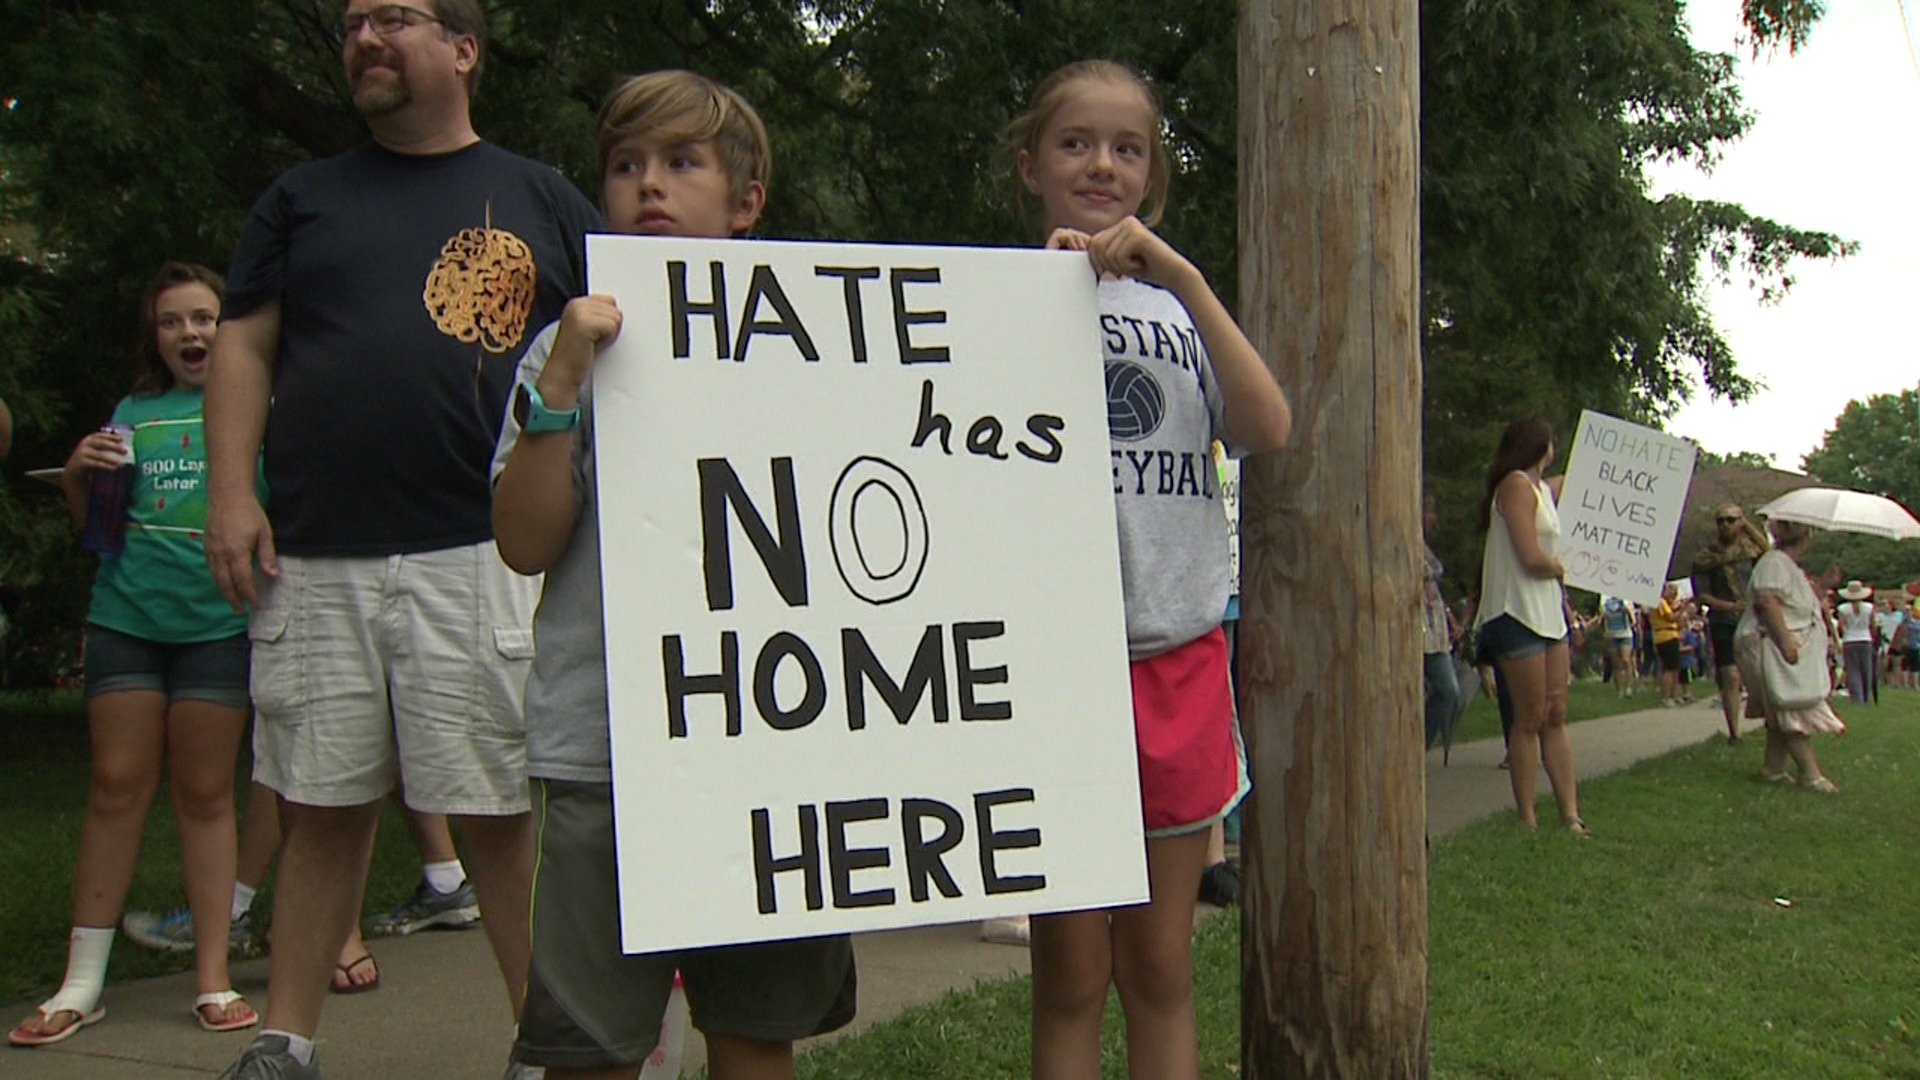 Scenes from No Hate rally